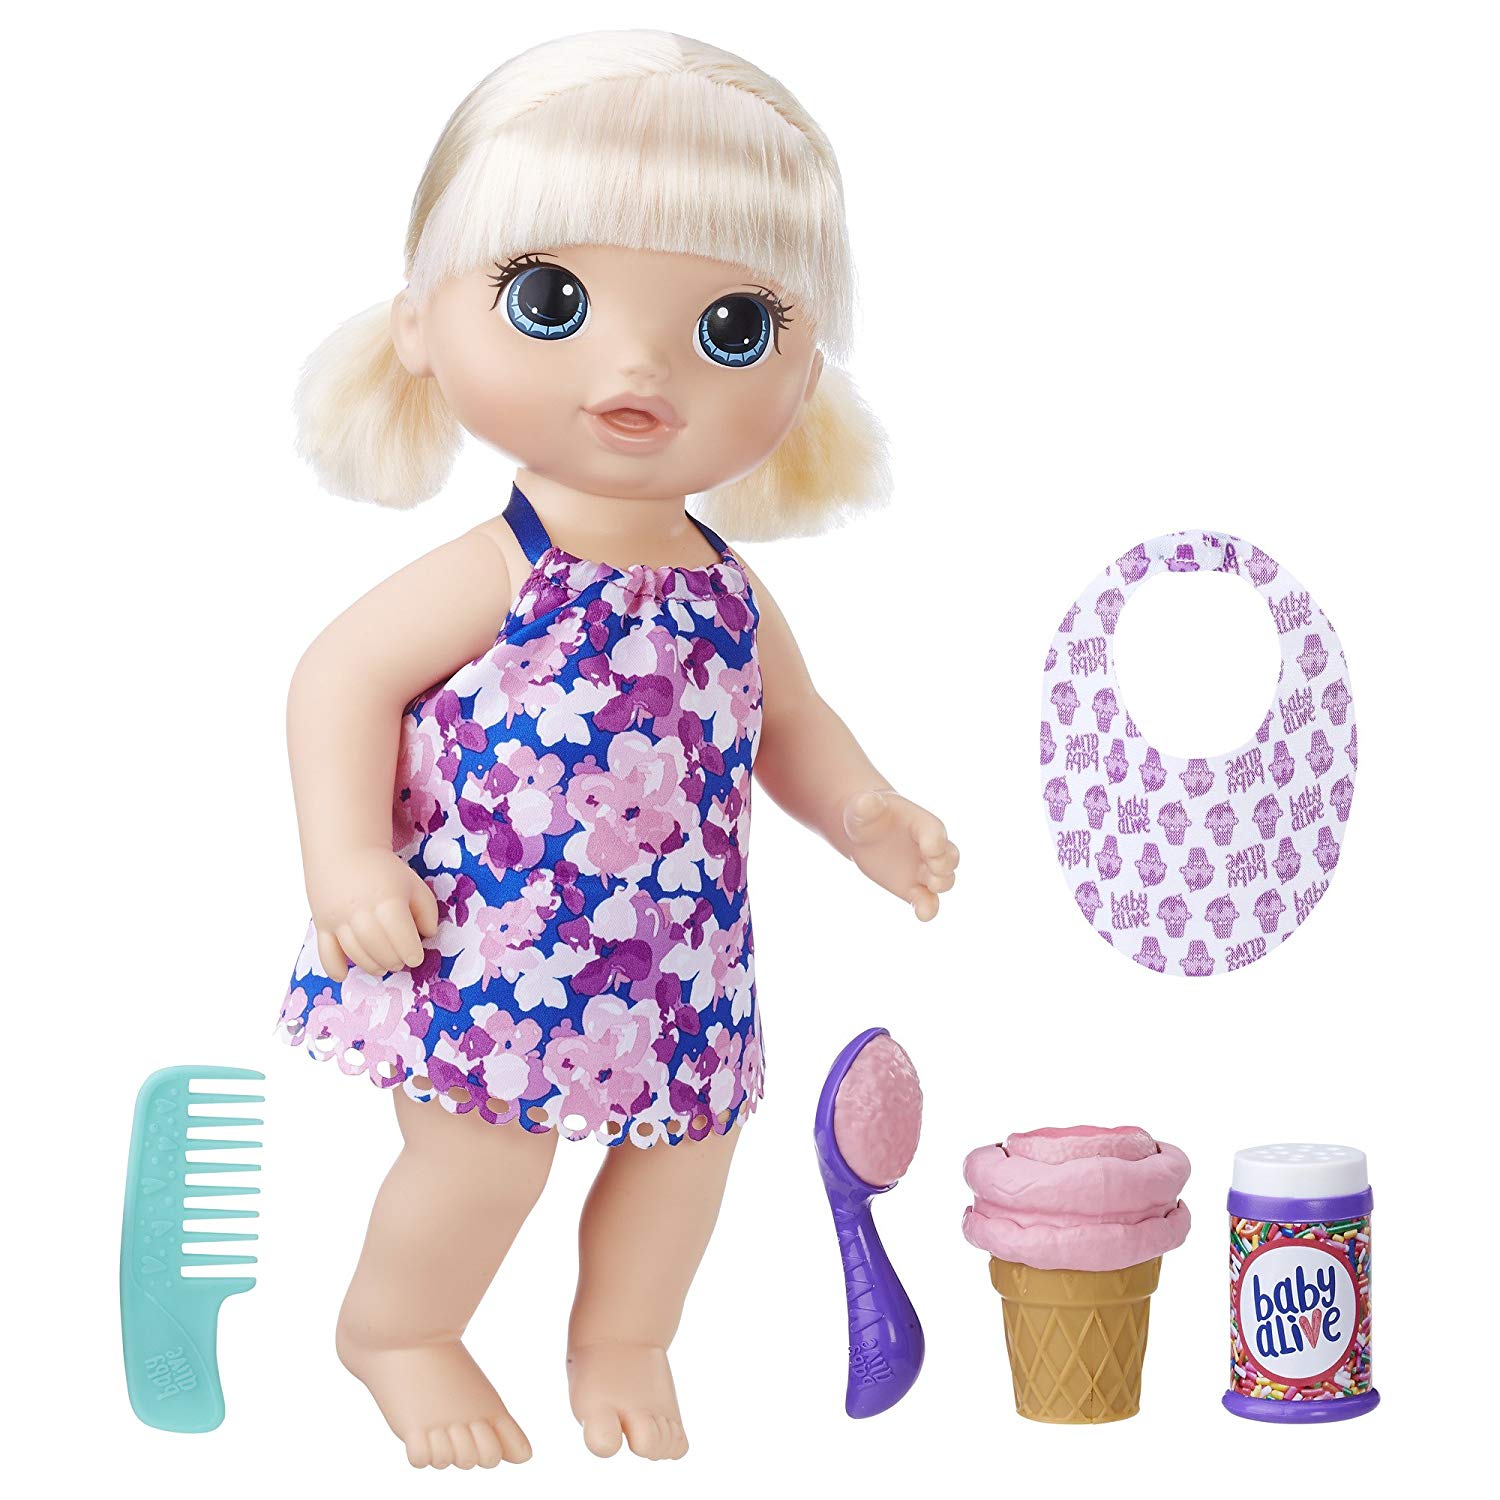 Amazon.com: Baby Alive Magical Scoops Baby Doll (Blonde), Ages 3 and ...